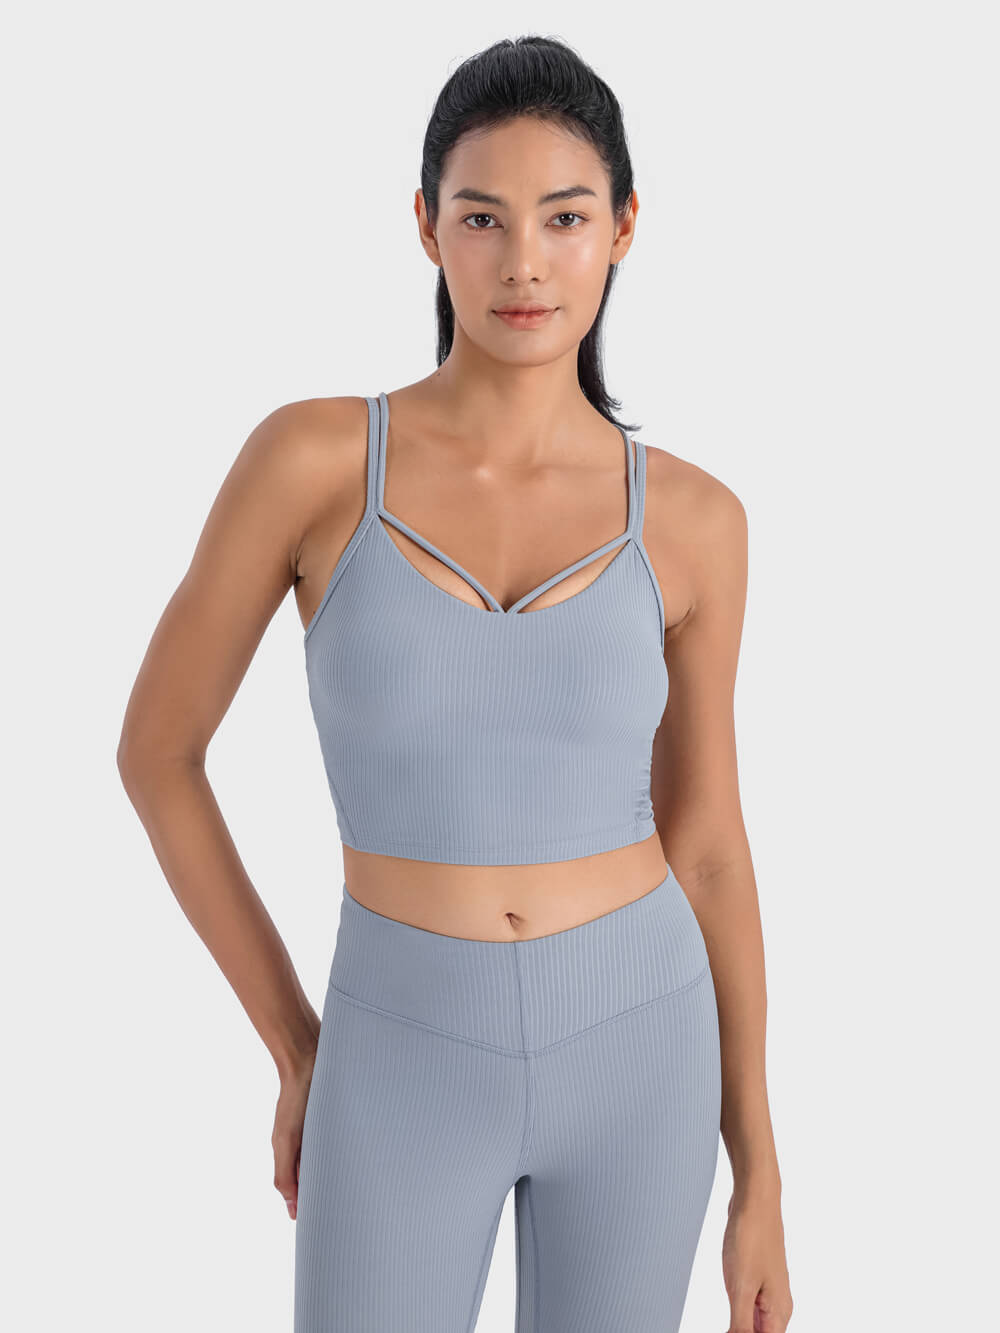 HKMX Shine on Sports Cropped Tank Top